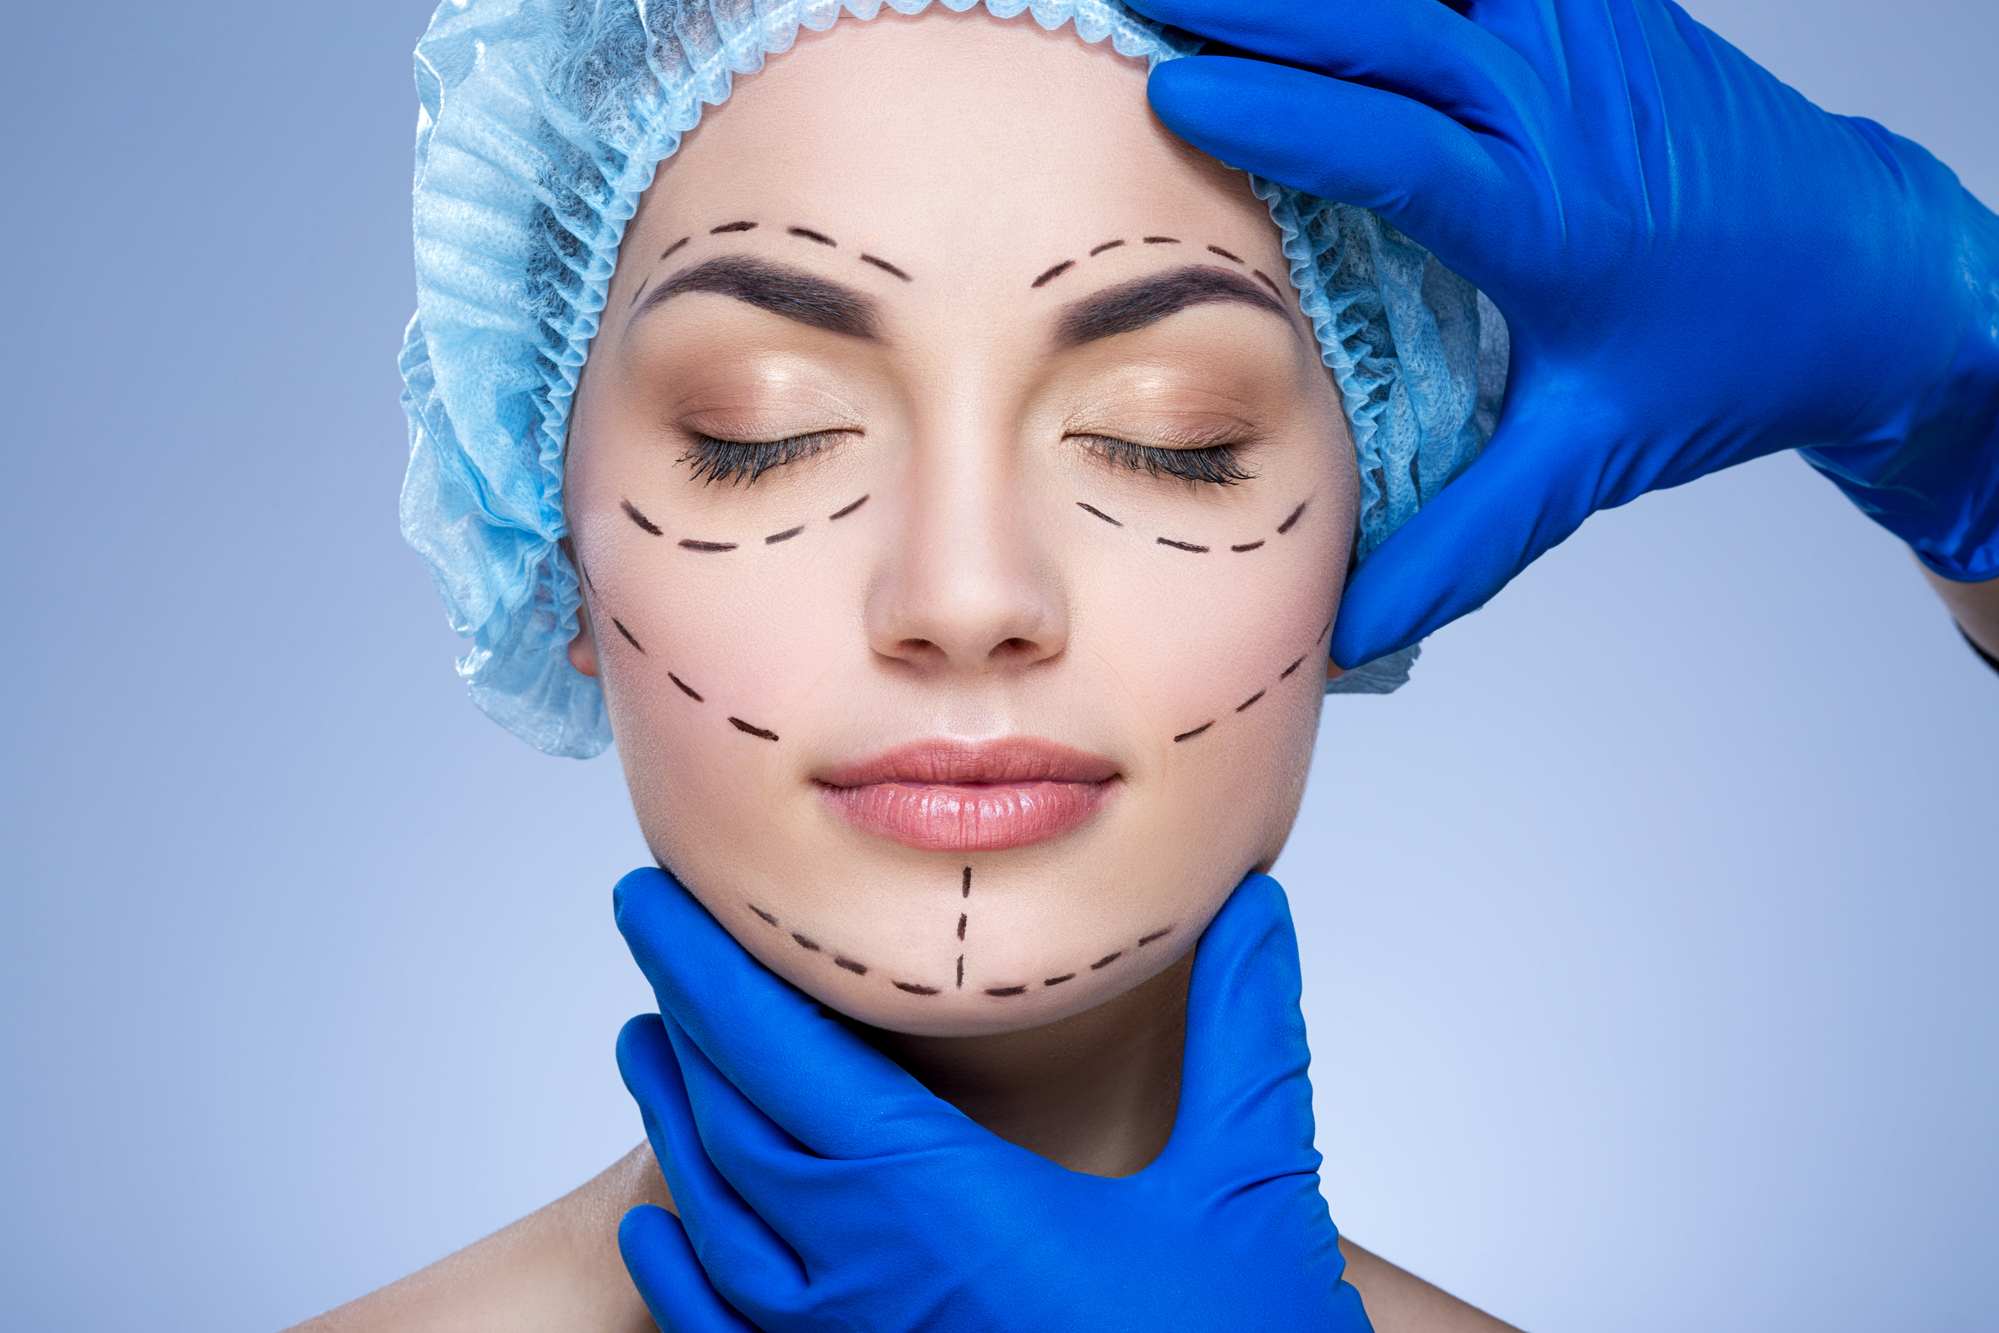 Fiction – Surprised by the Plastic Surgeon